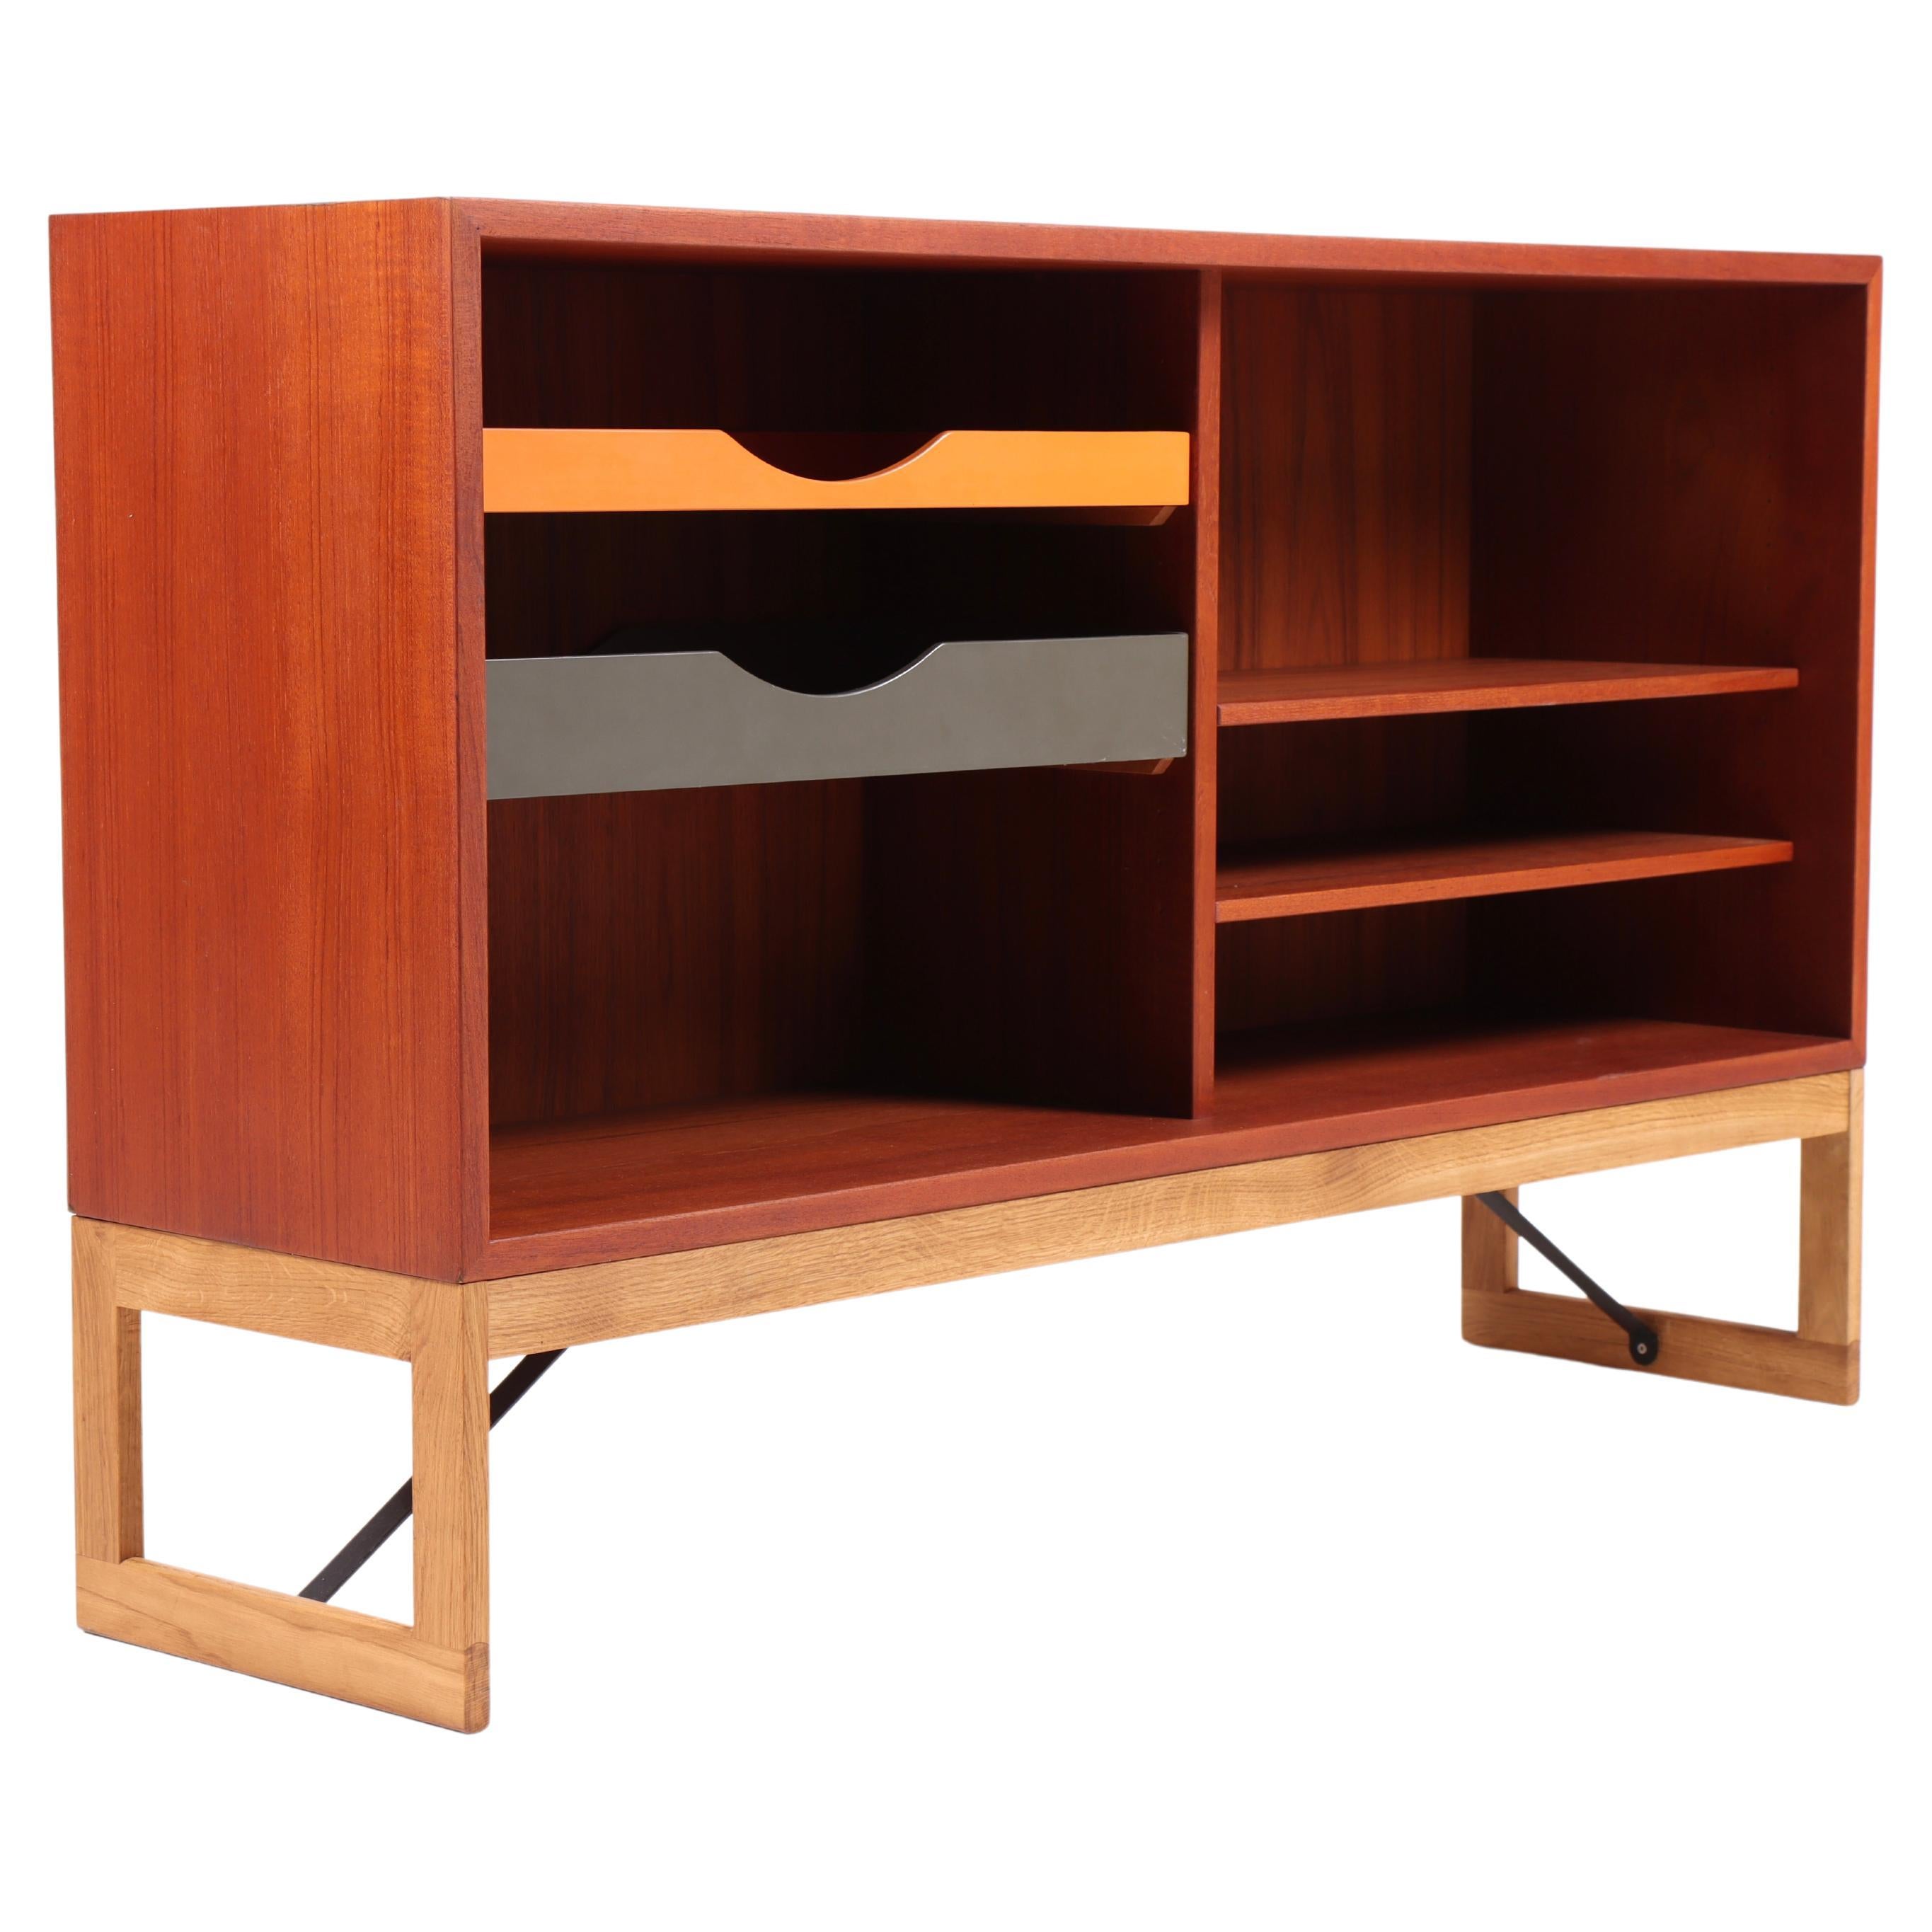 Low Midcentury Bookcase, Teak with Colored Drawers by Børge Mogensen For Sale